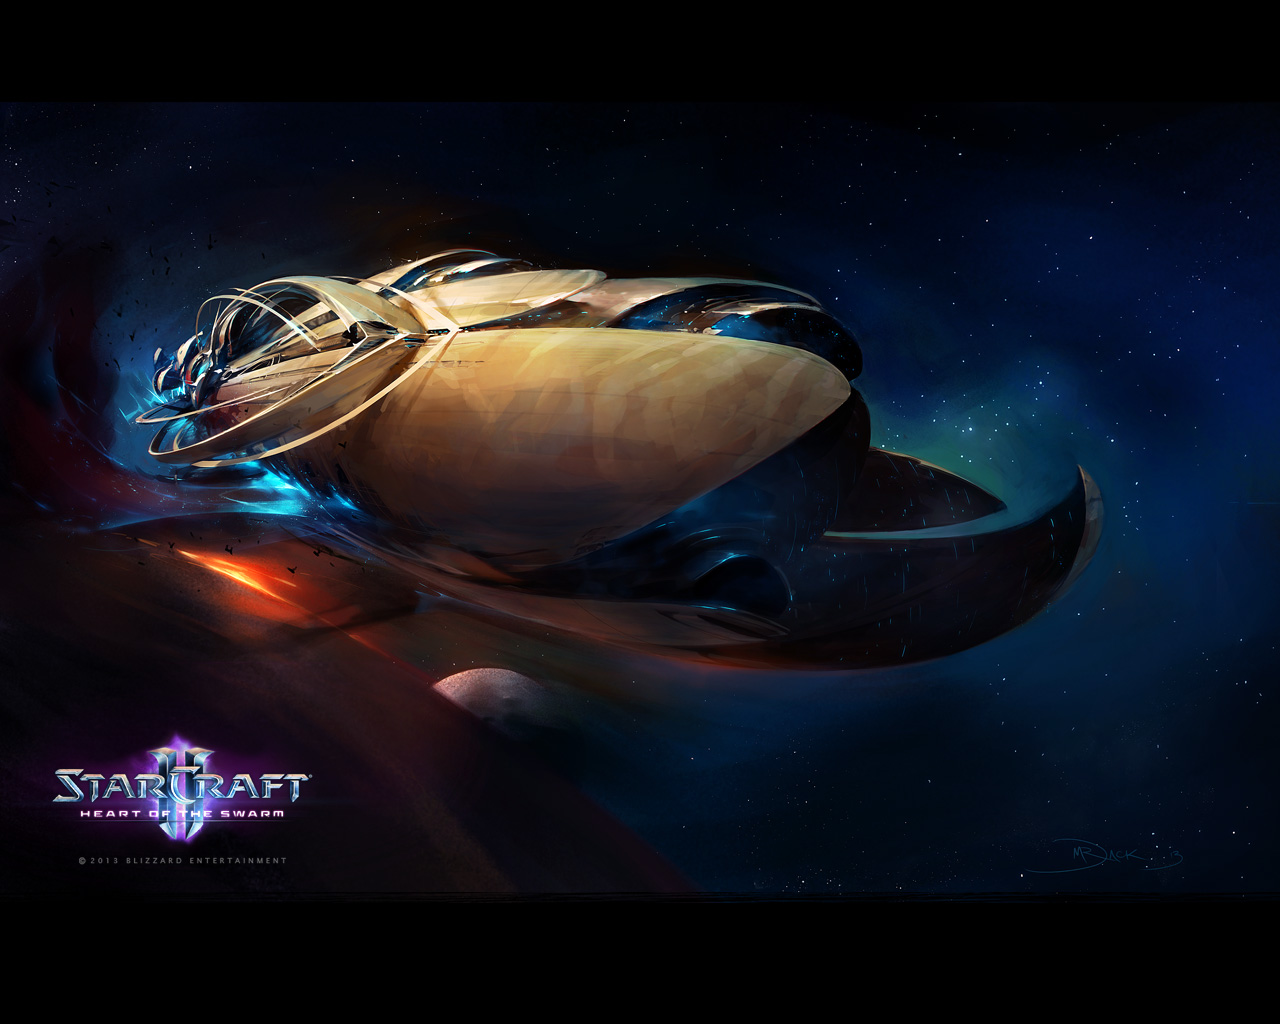 Video Game StarCraft Ii Heart Of The Swarm 1280x1024